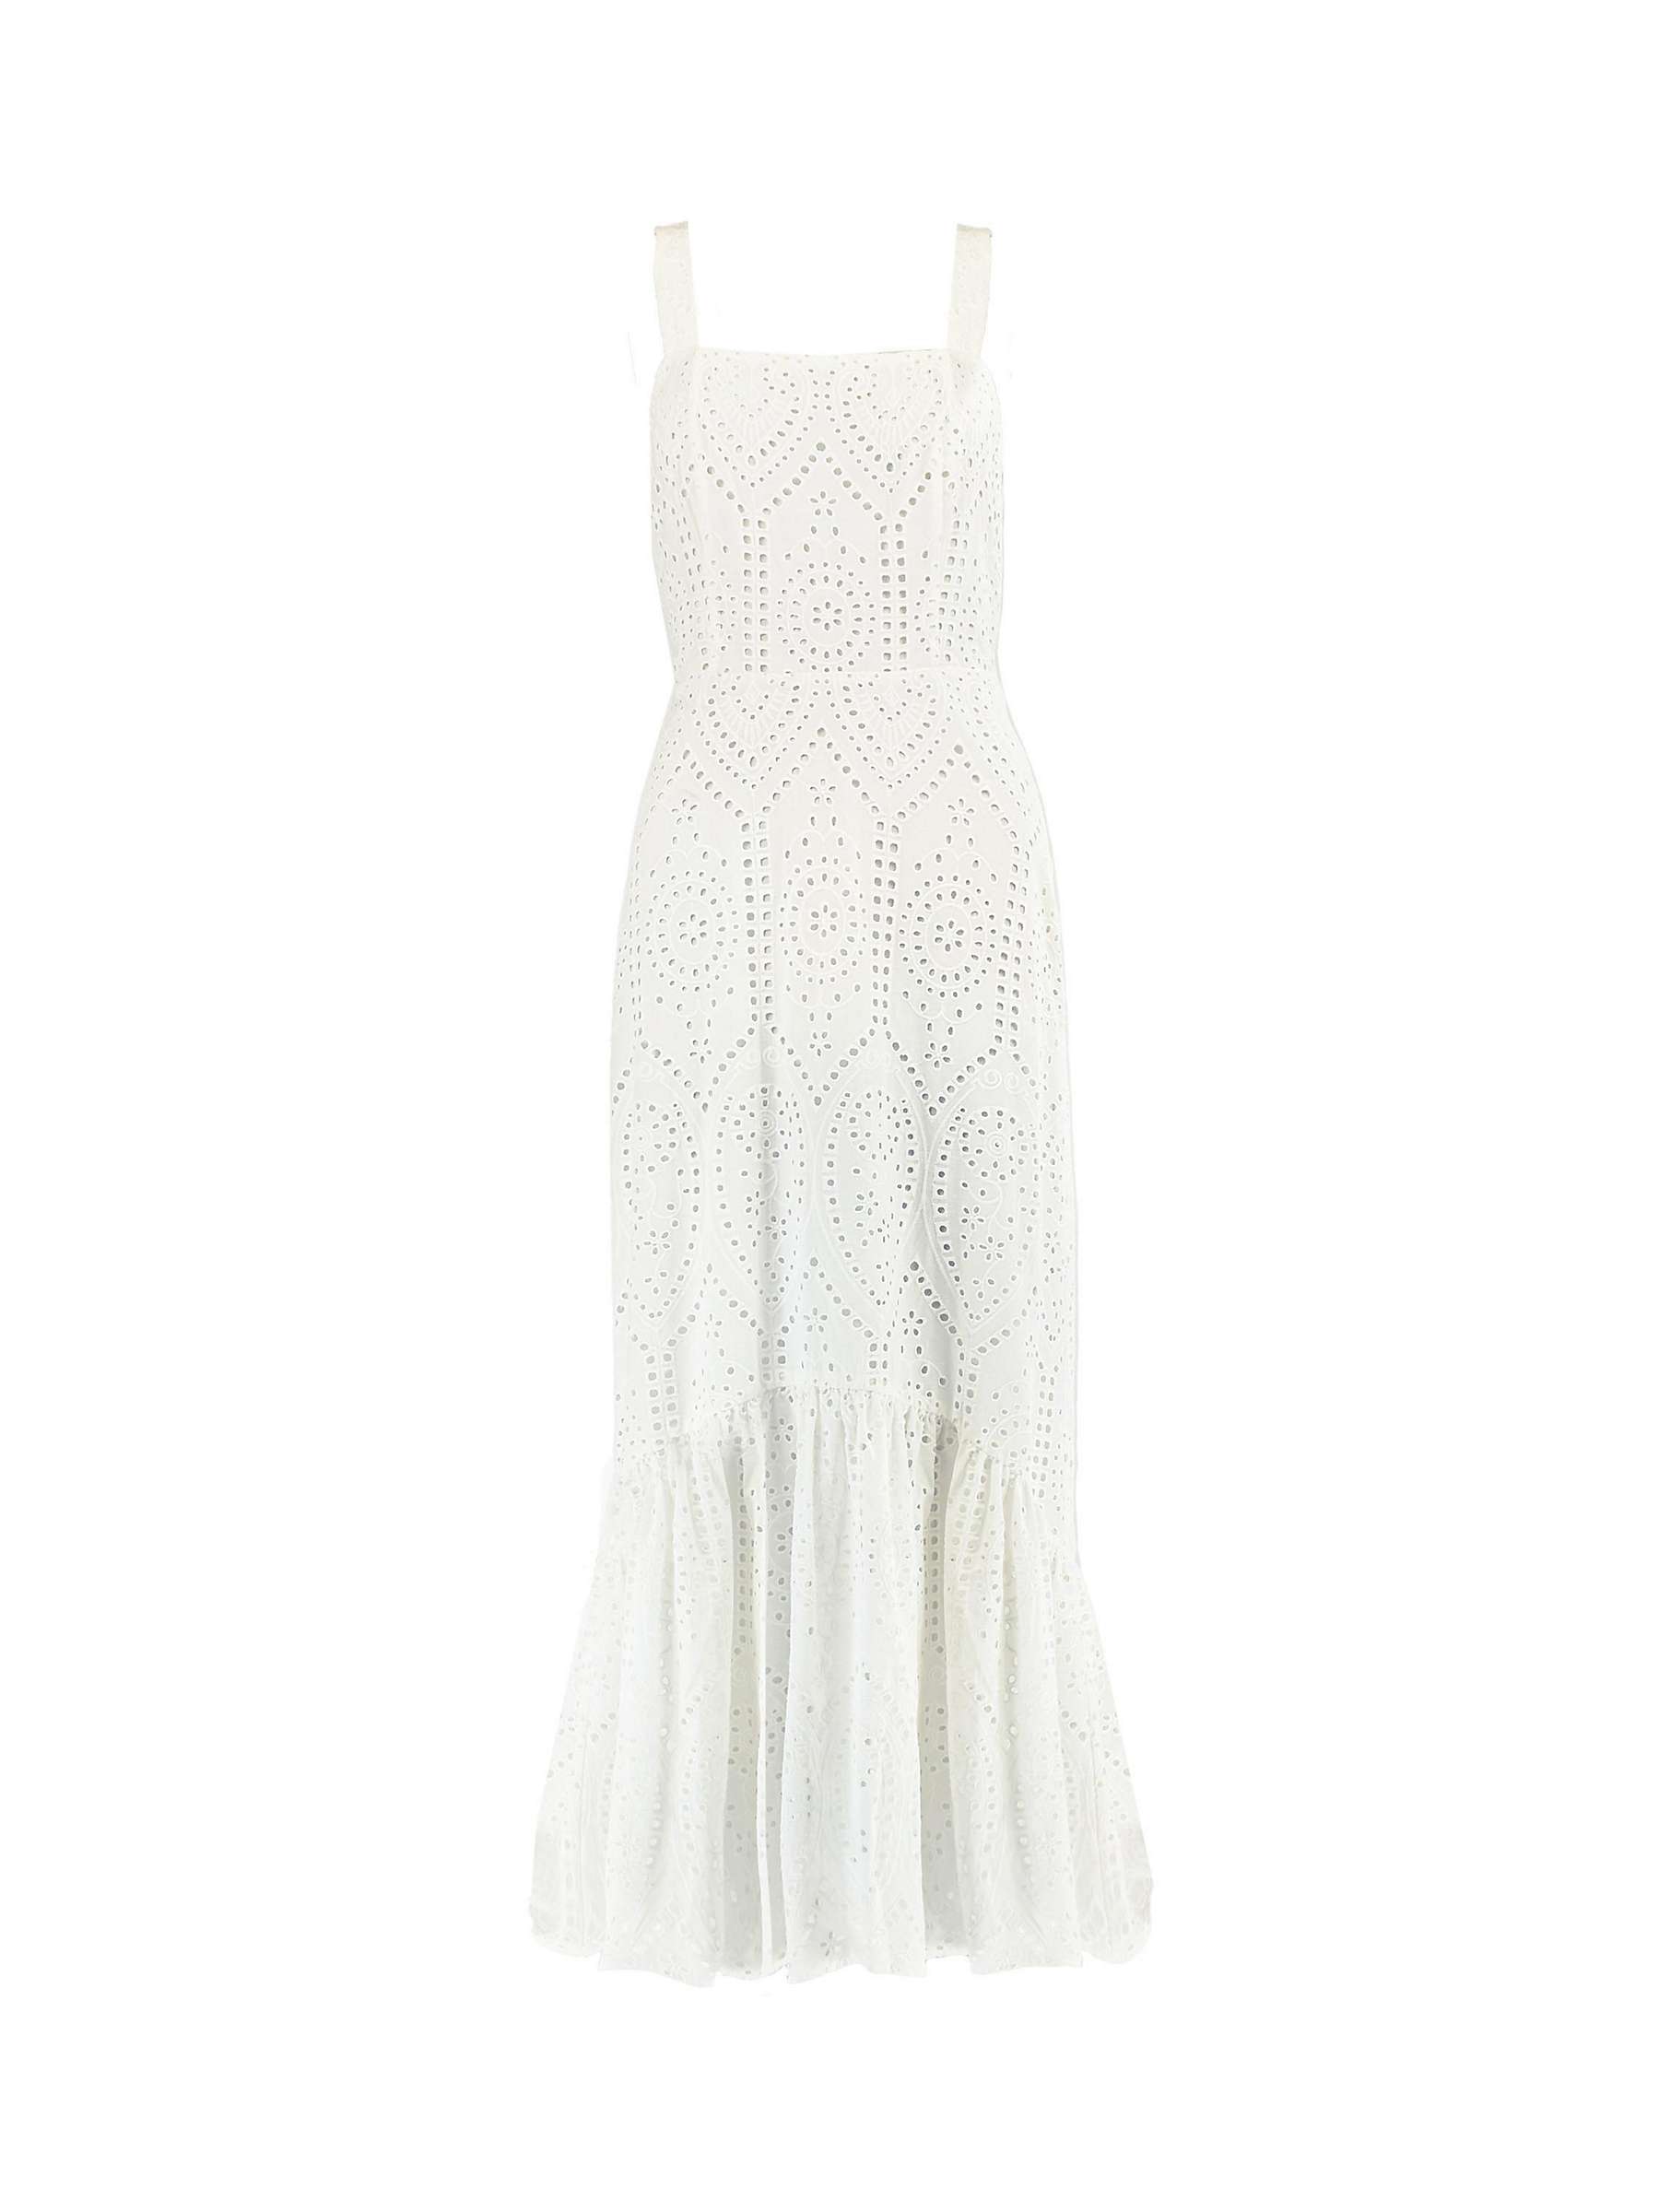 Ro&Zo Strappy Broderie Anglaise Sun Dress, White at John Lewis & Partners